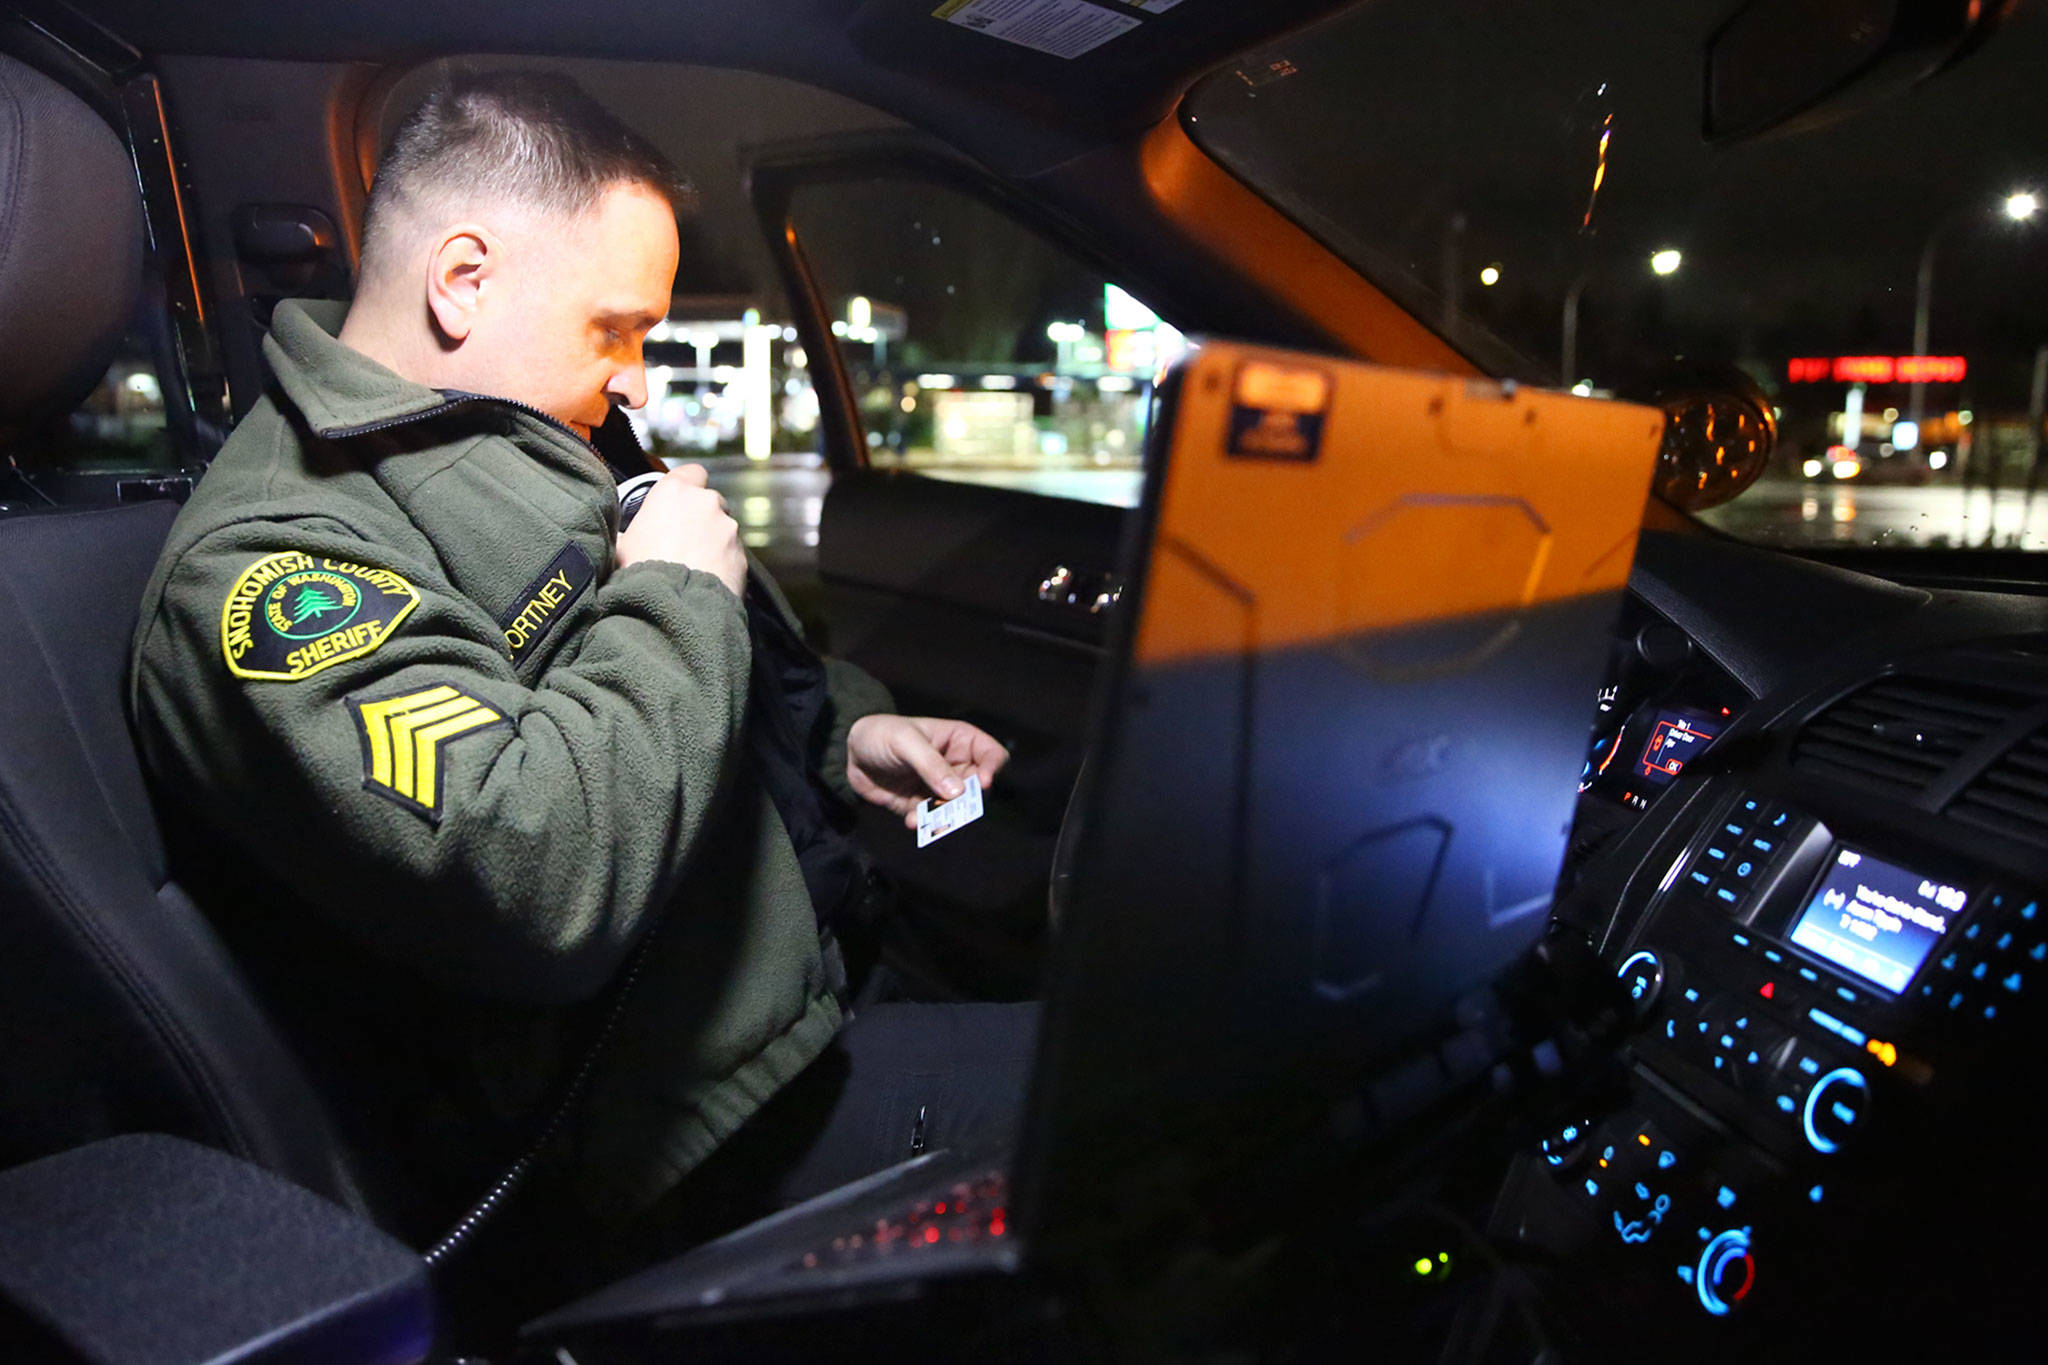 Adam Fortney calls in a drivers license during a traffic stop in Everett on Dec. 31, 2019. (Kevin Clark / The Herald)                                Adam Fortney calls in a drivers license during a traffic stop in Everett on Dec. 31, 2019. (Kevin Clark / The Herald)